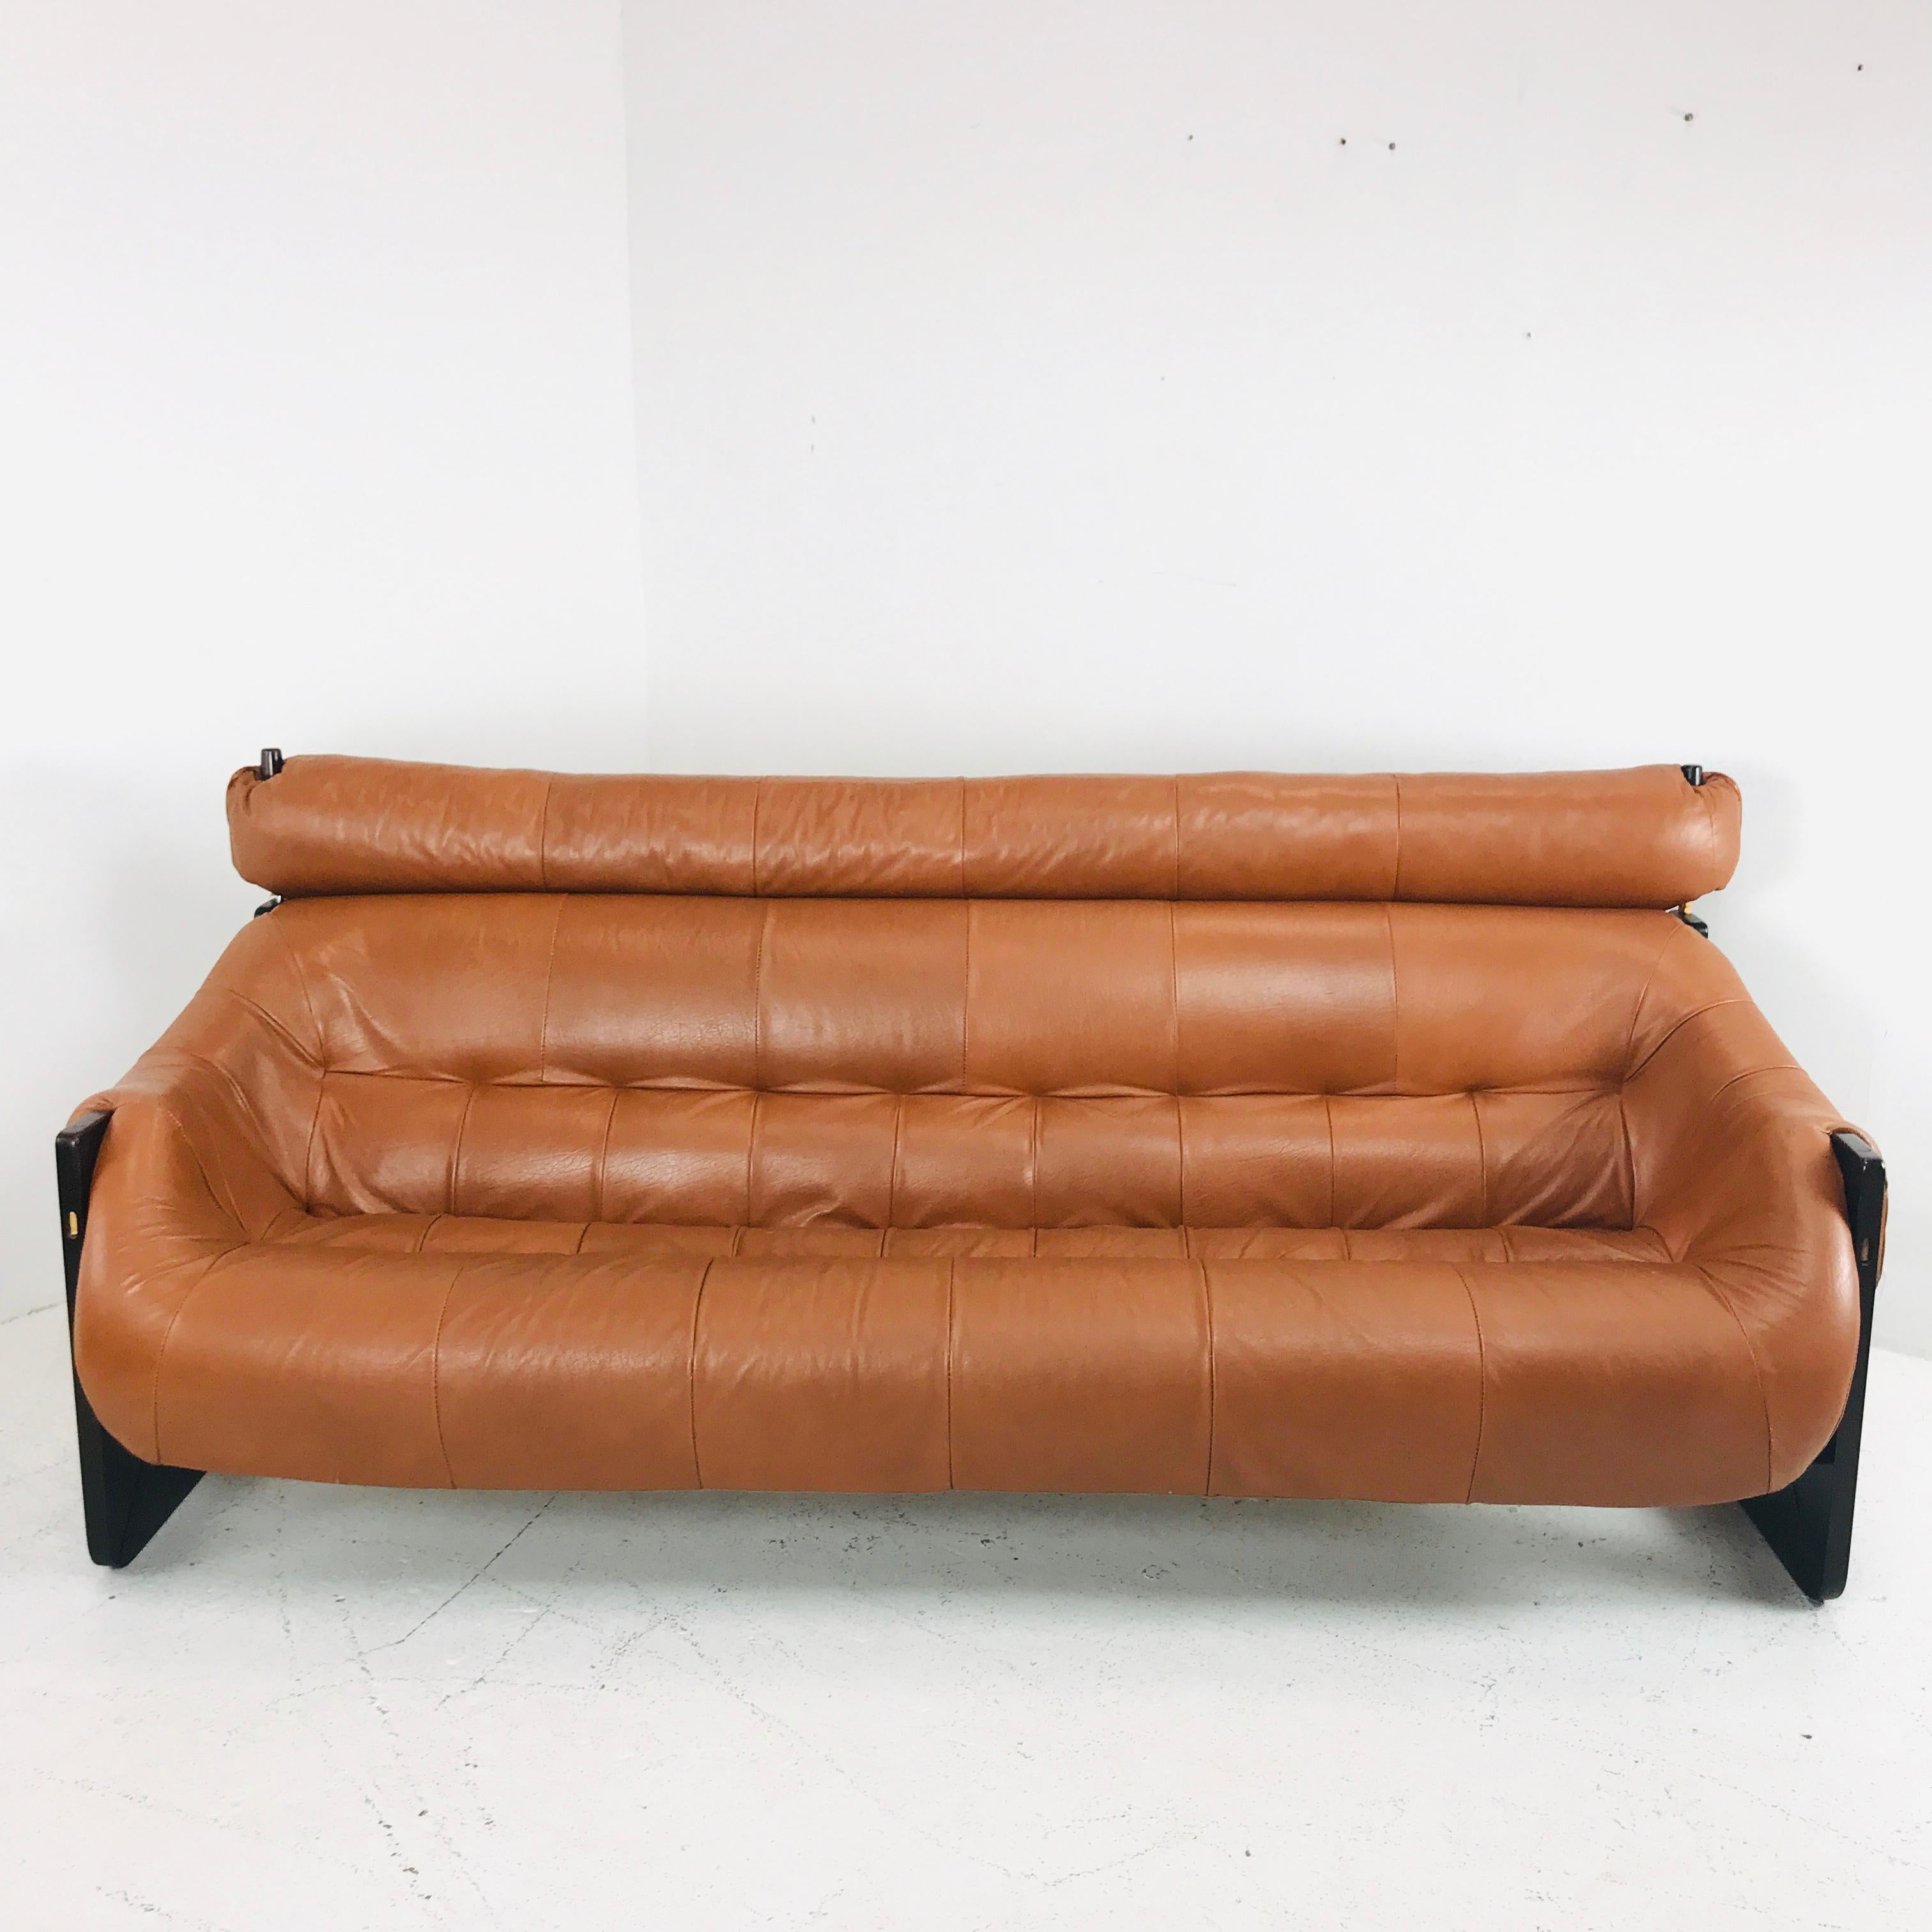 Modern Percival Lafer Leather and Wood Sofa